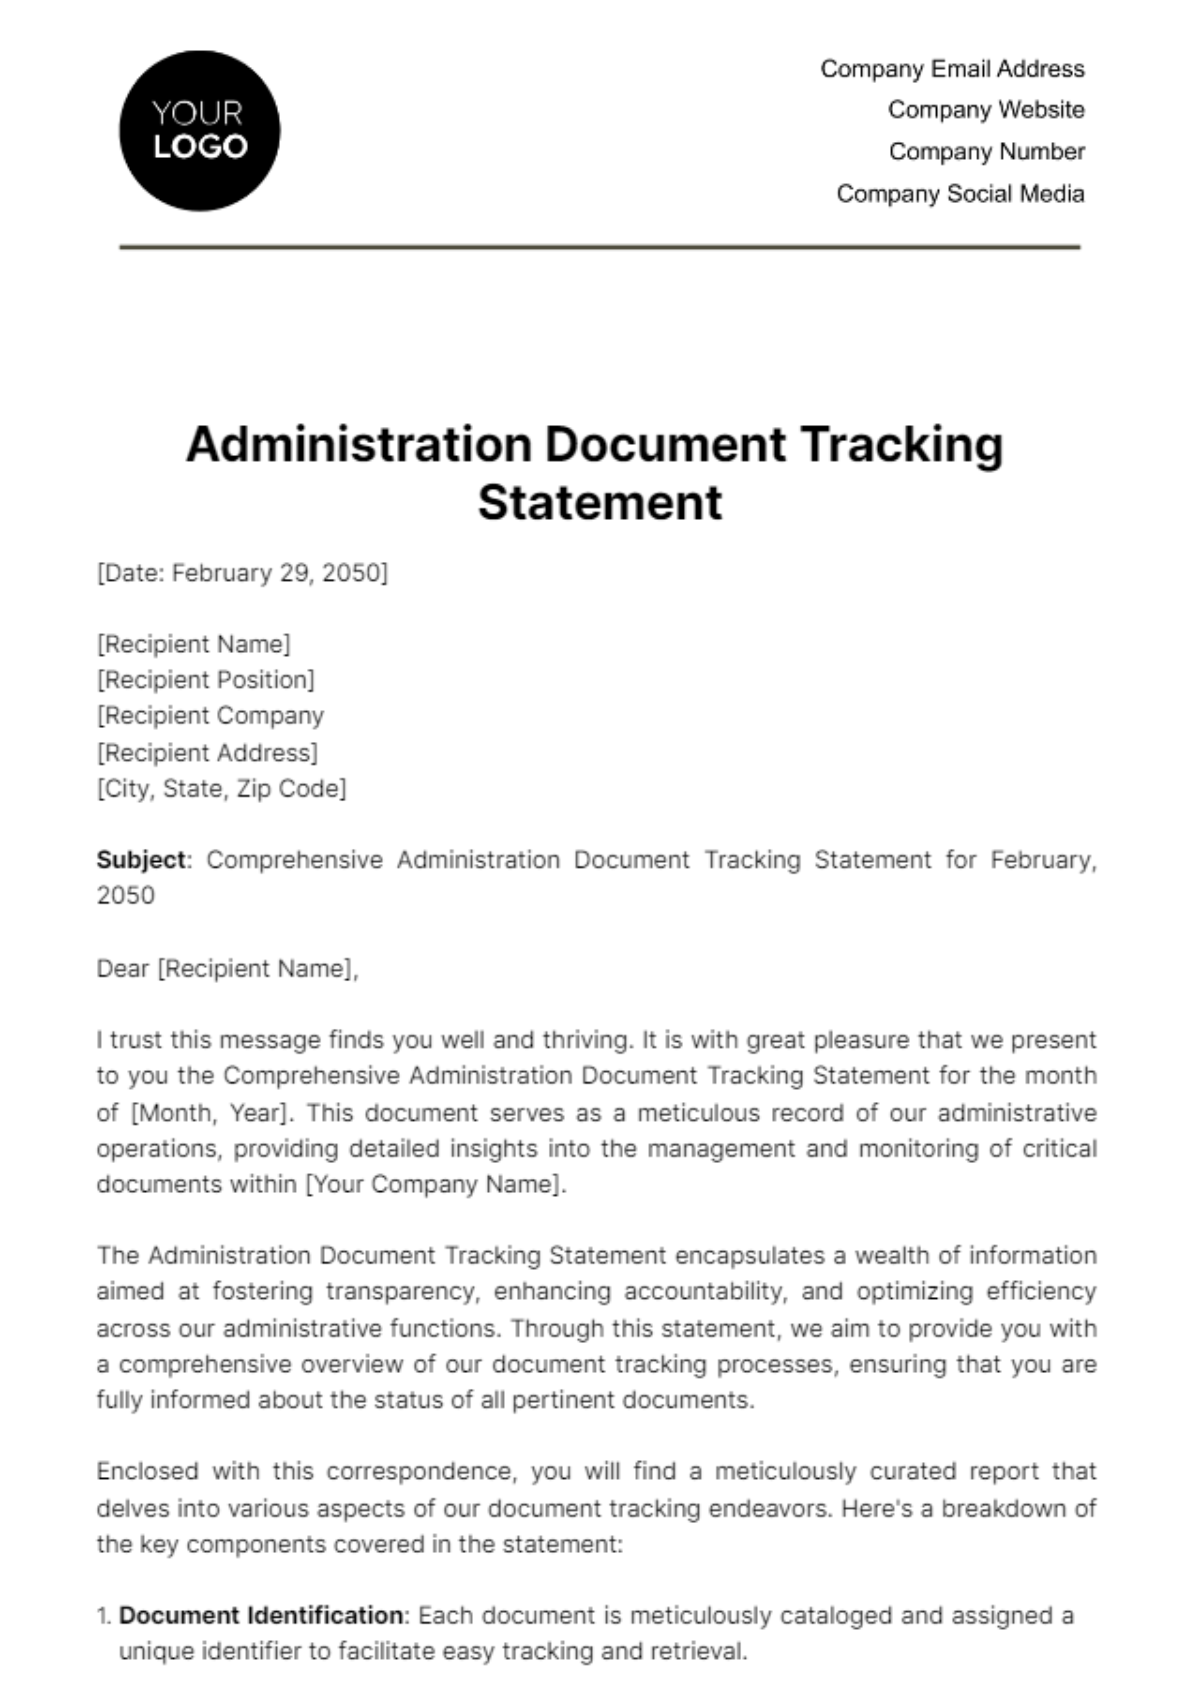 Free Administration Document Tracking Statement Template